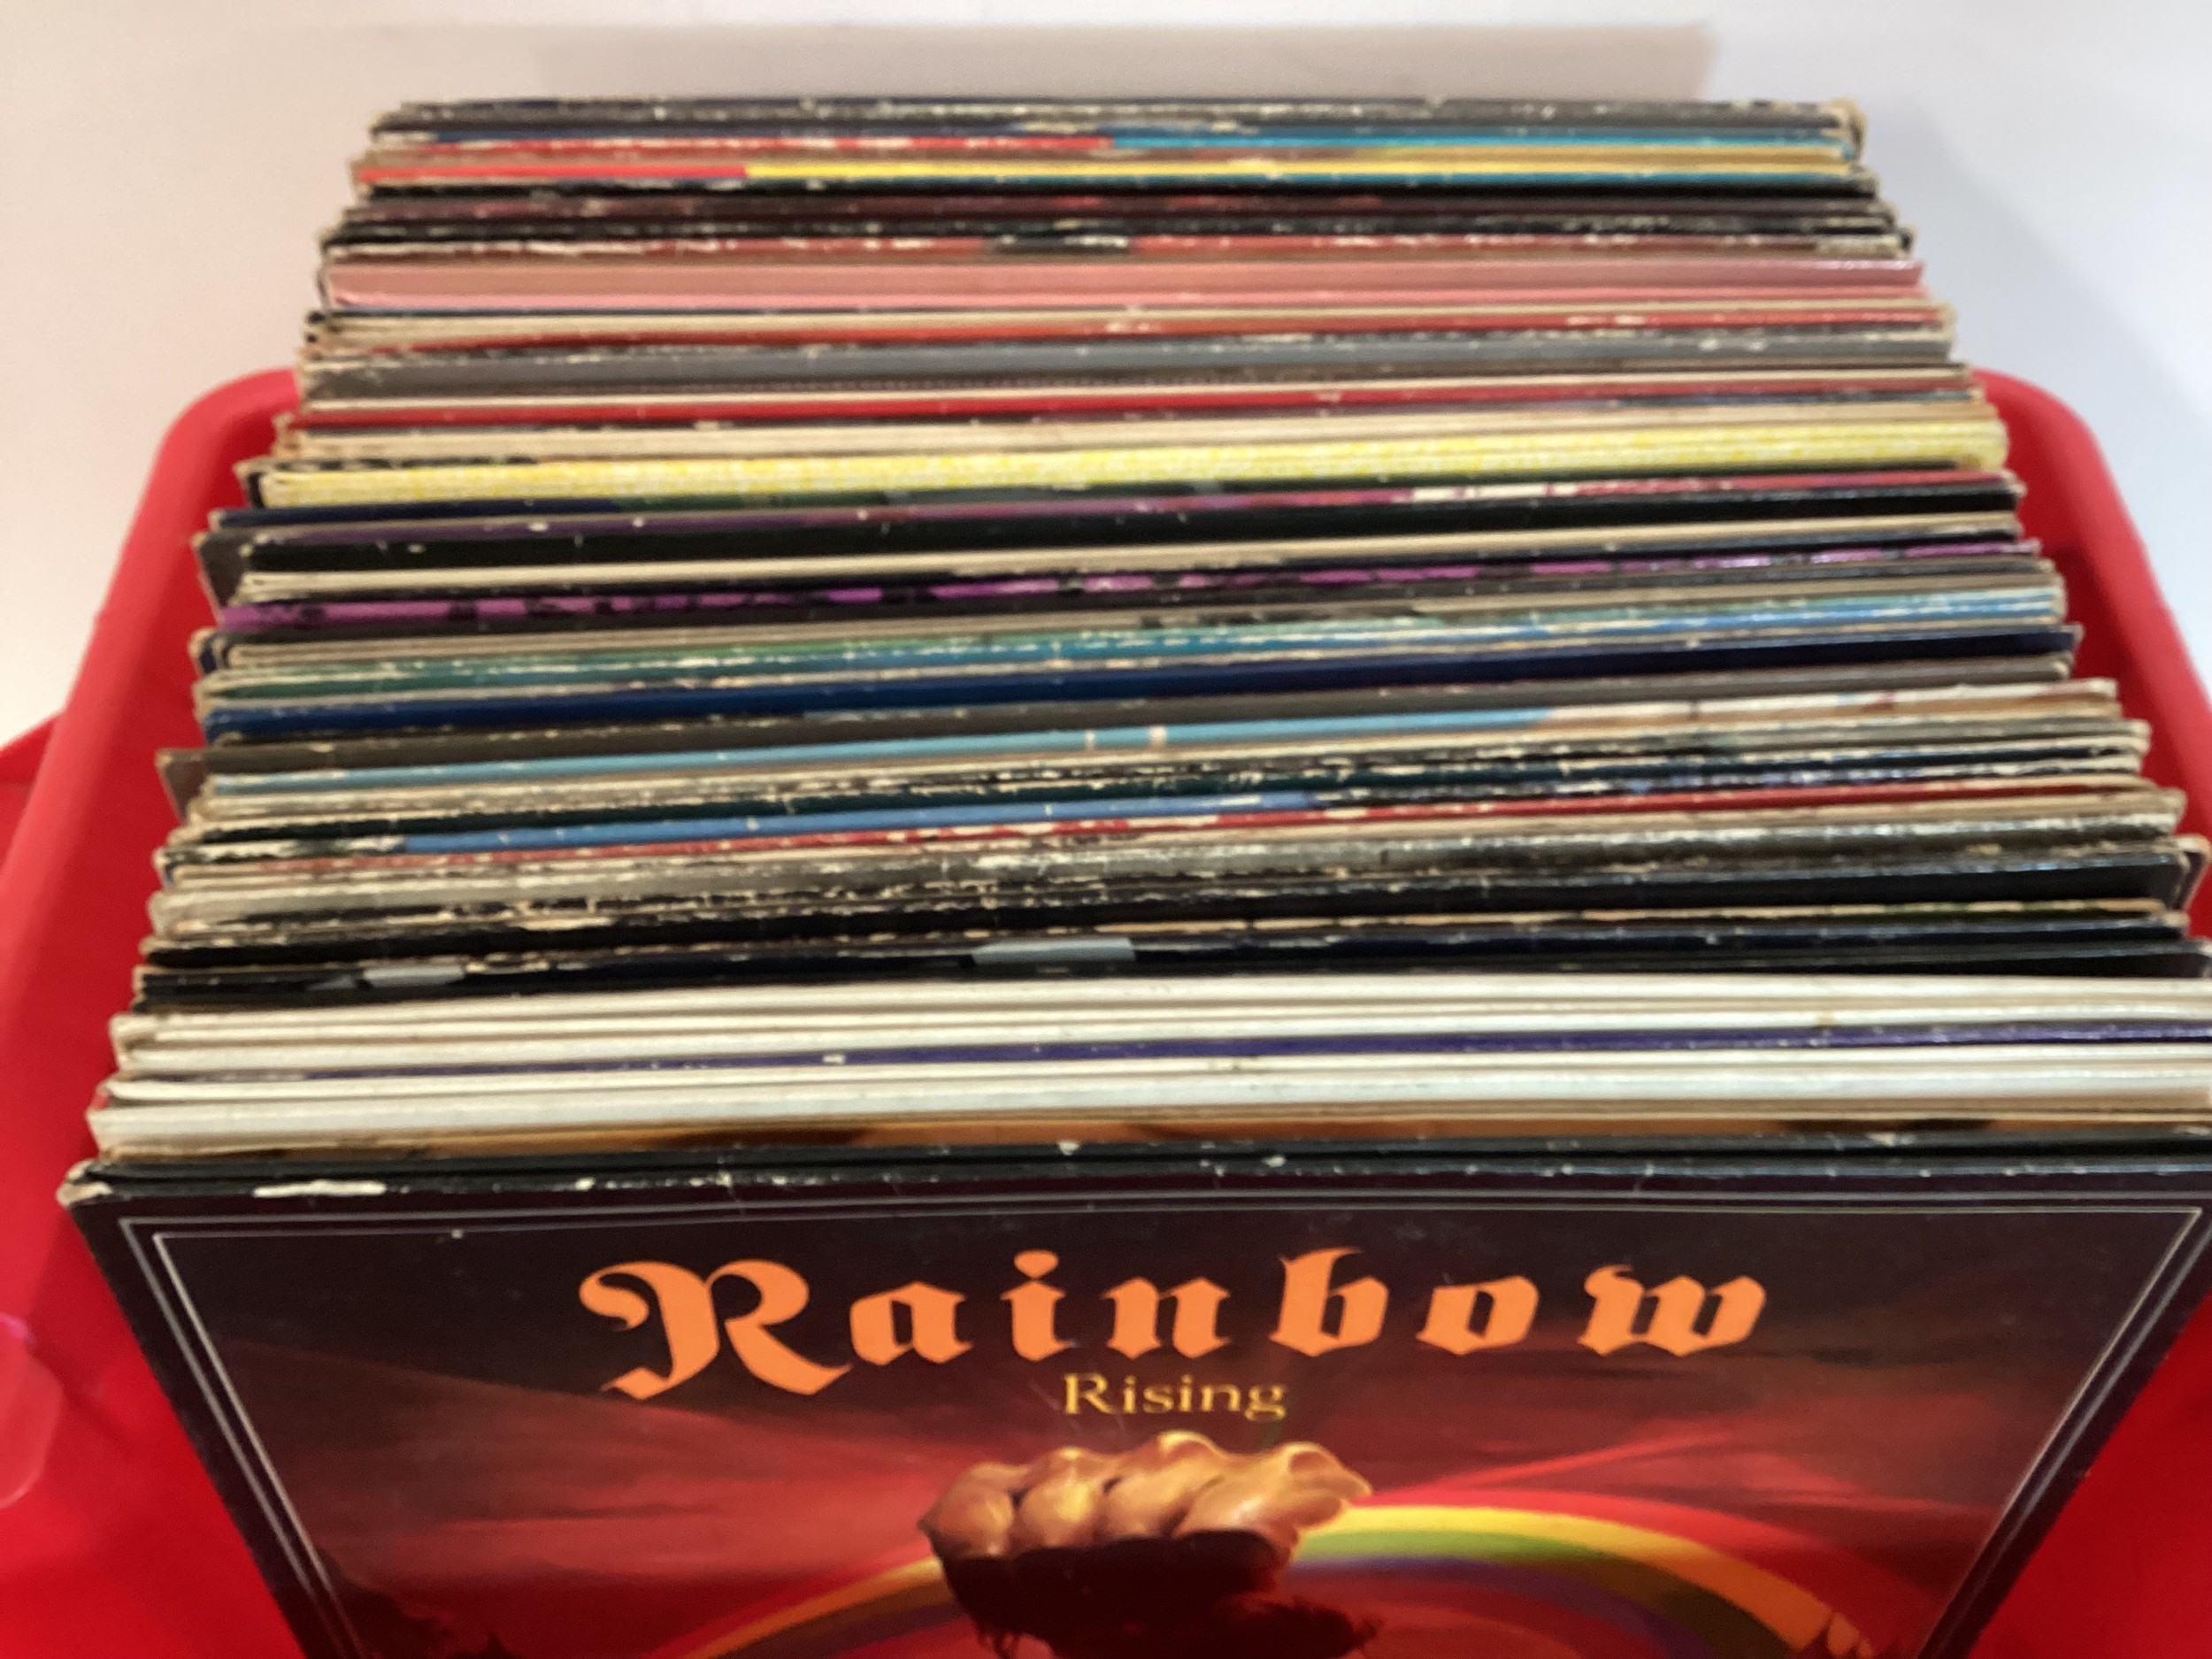 LARGE CRATE OF VARIOUS POP / ROCK RELATED VINYL LP RECORDS. This box contains an assortment of